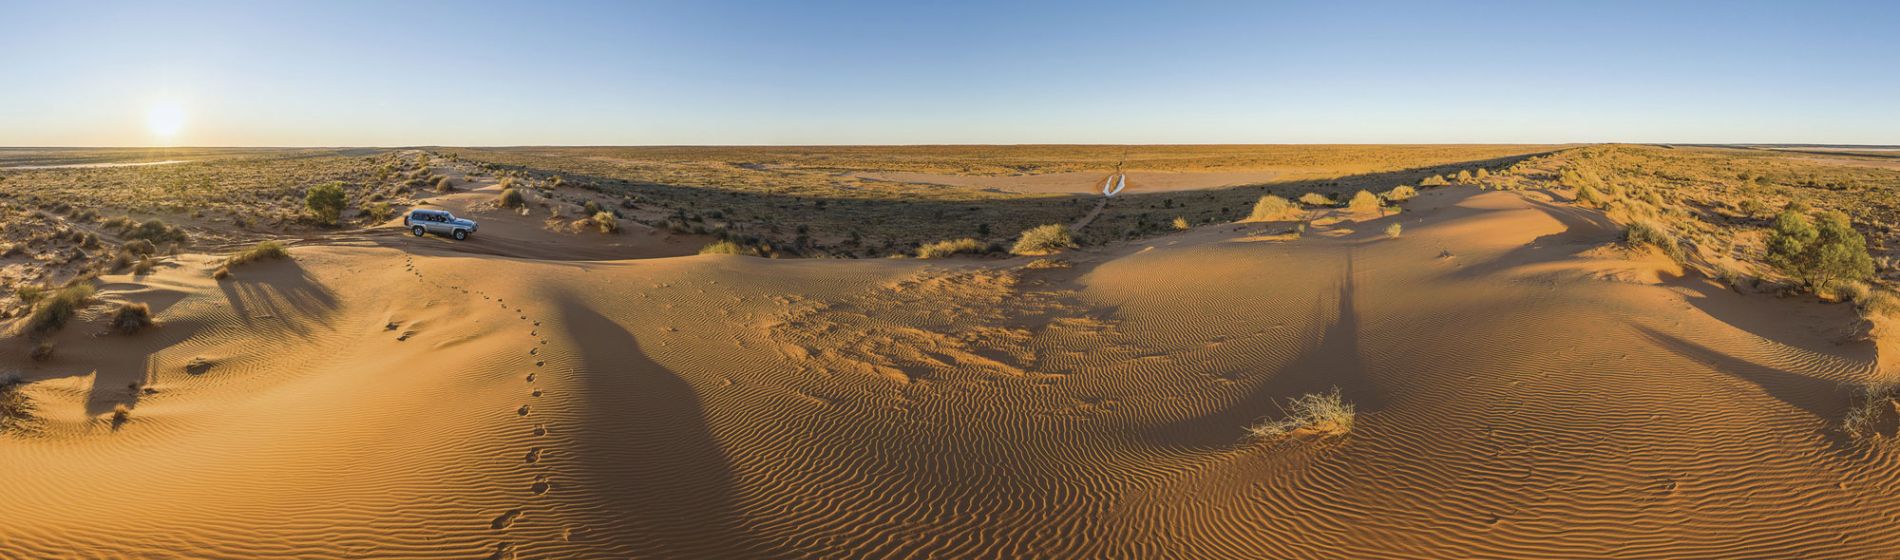 qld_outback_birdsville_tourism_events_qld.jpg